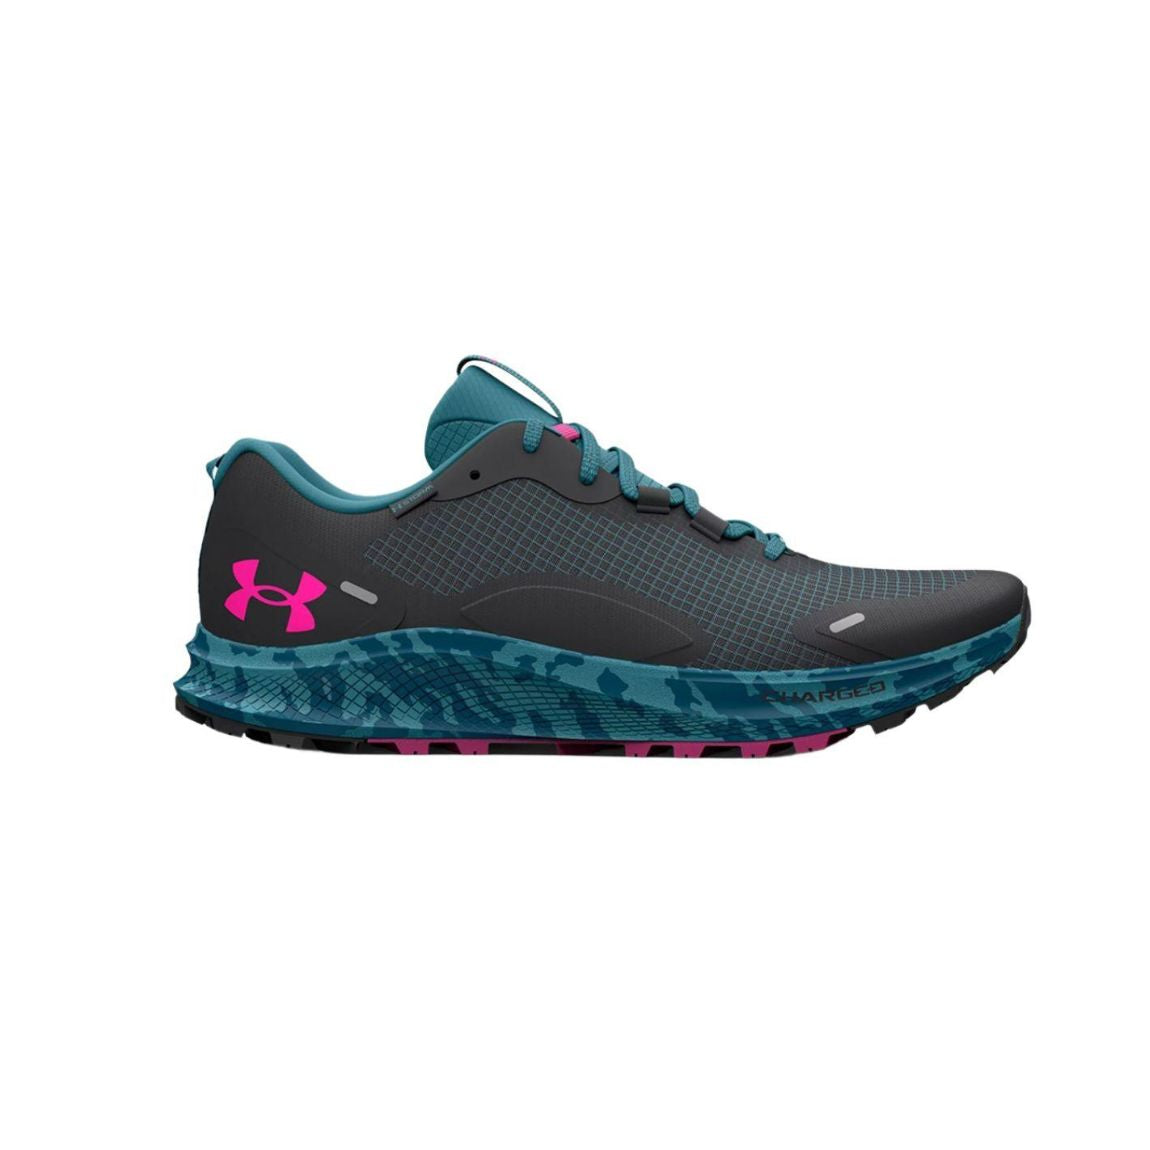 Women's Under Armour Charged Bandit Trail 2 Storm Running Shoes